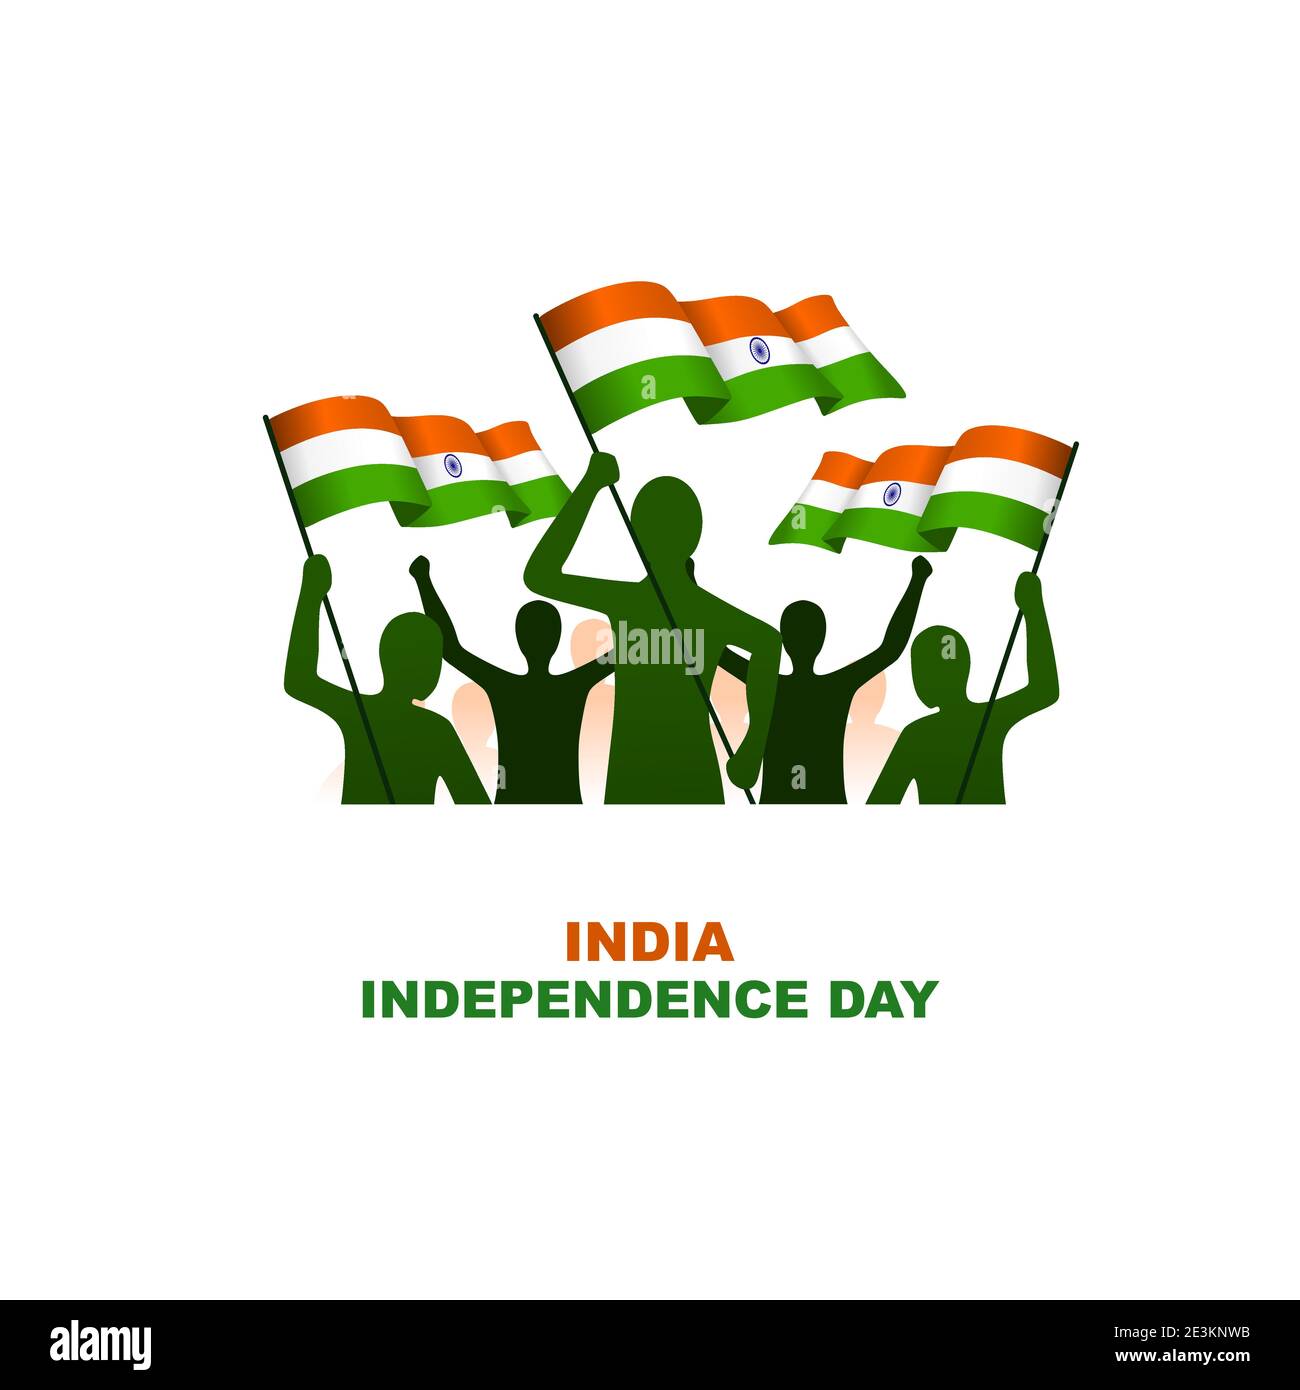 india independence day flat illustration Stock Vector